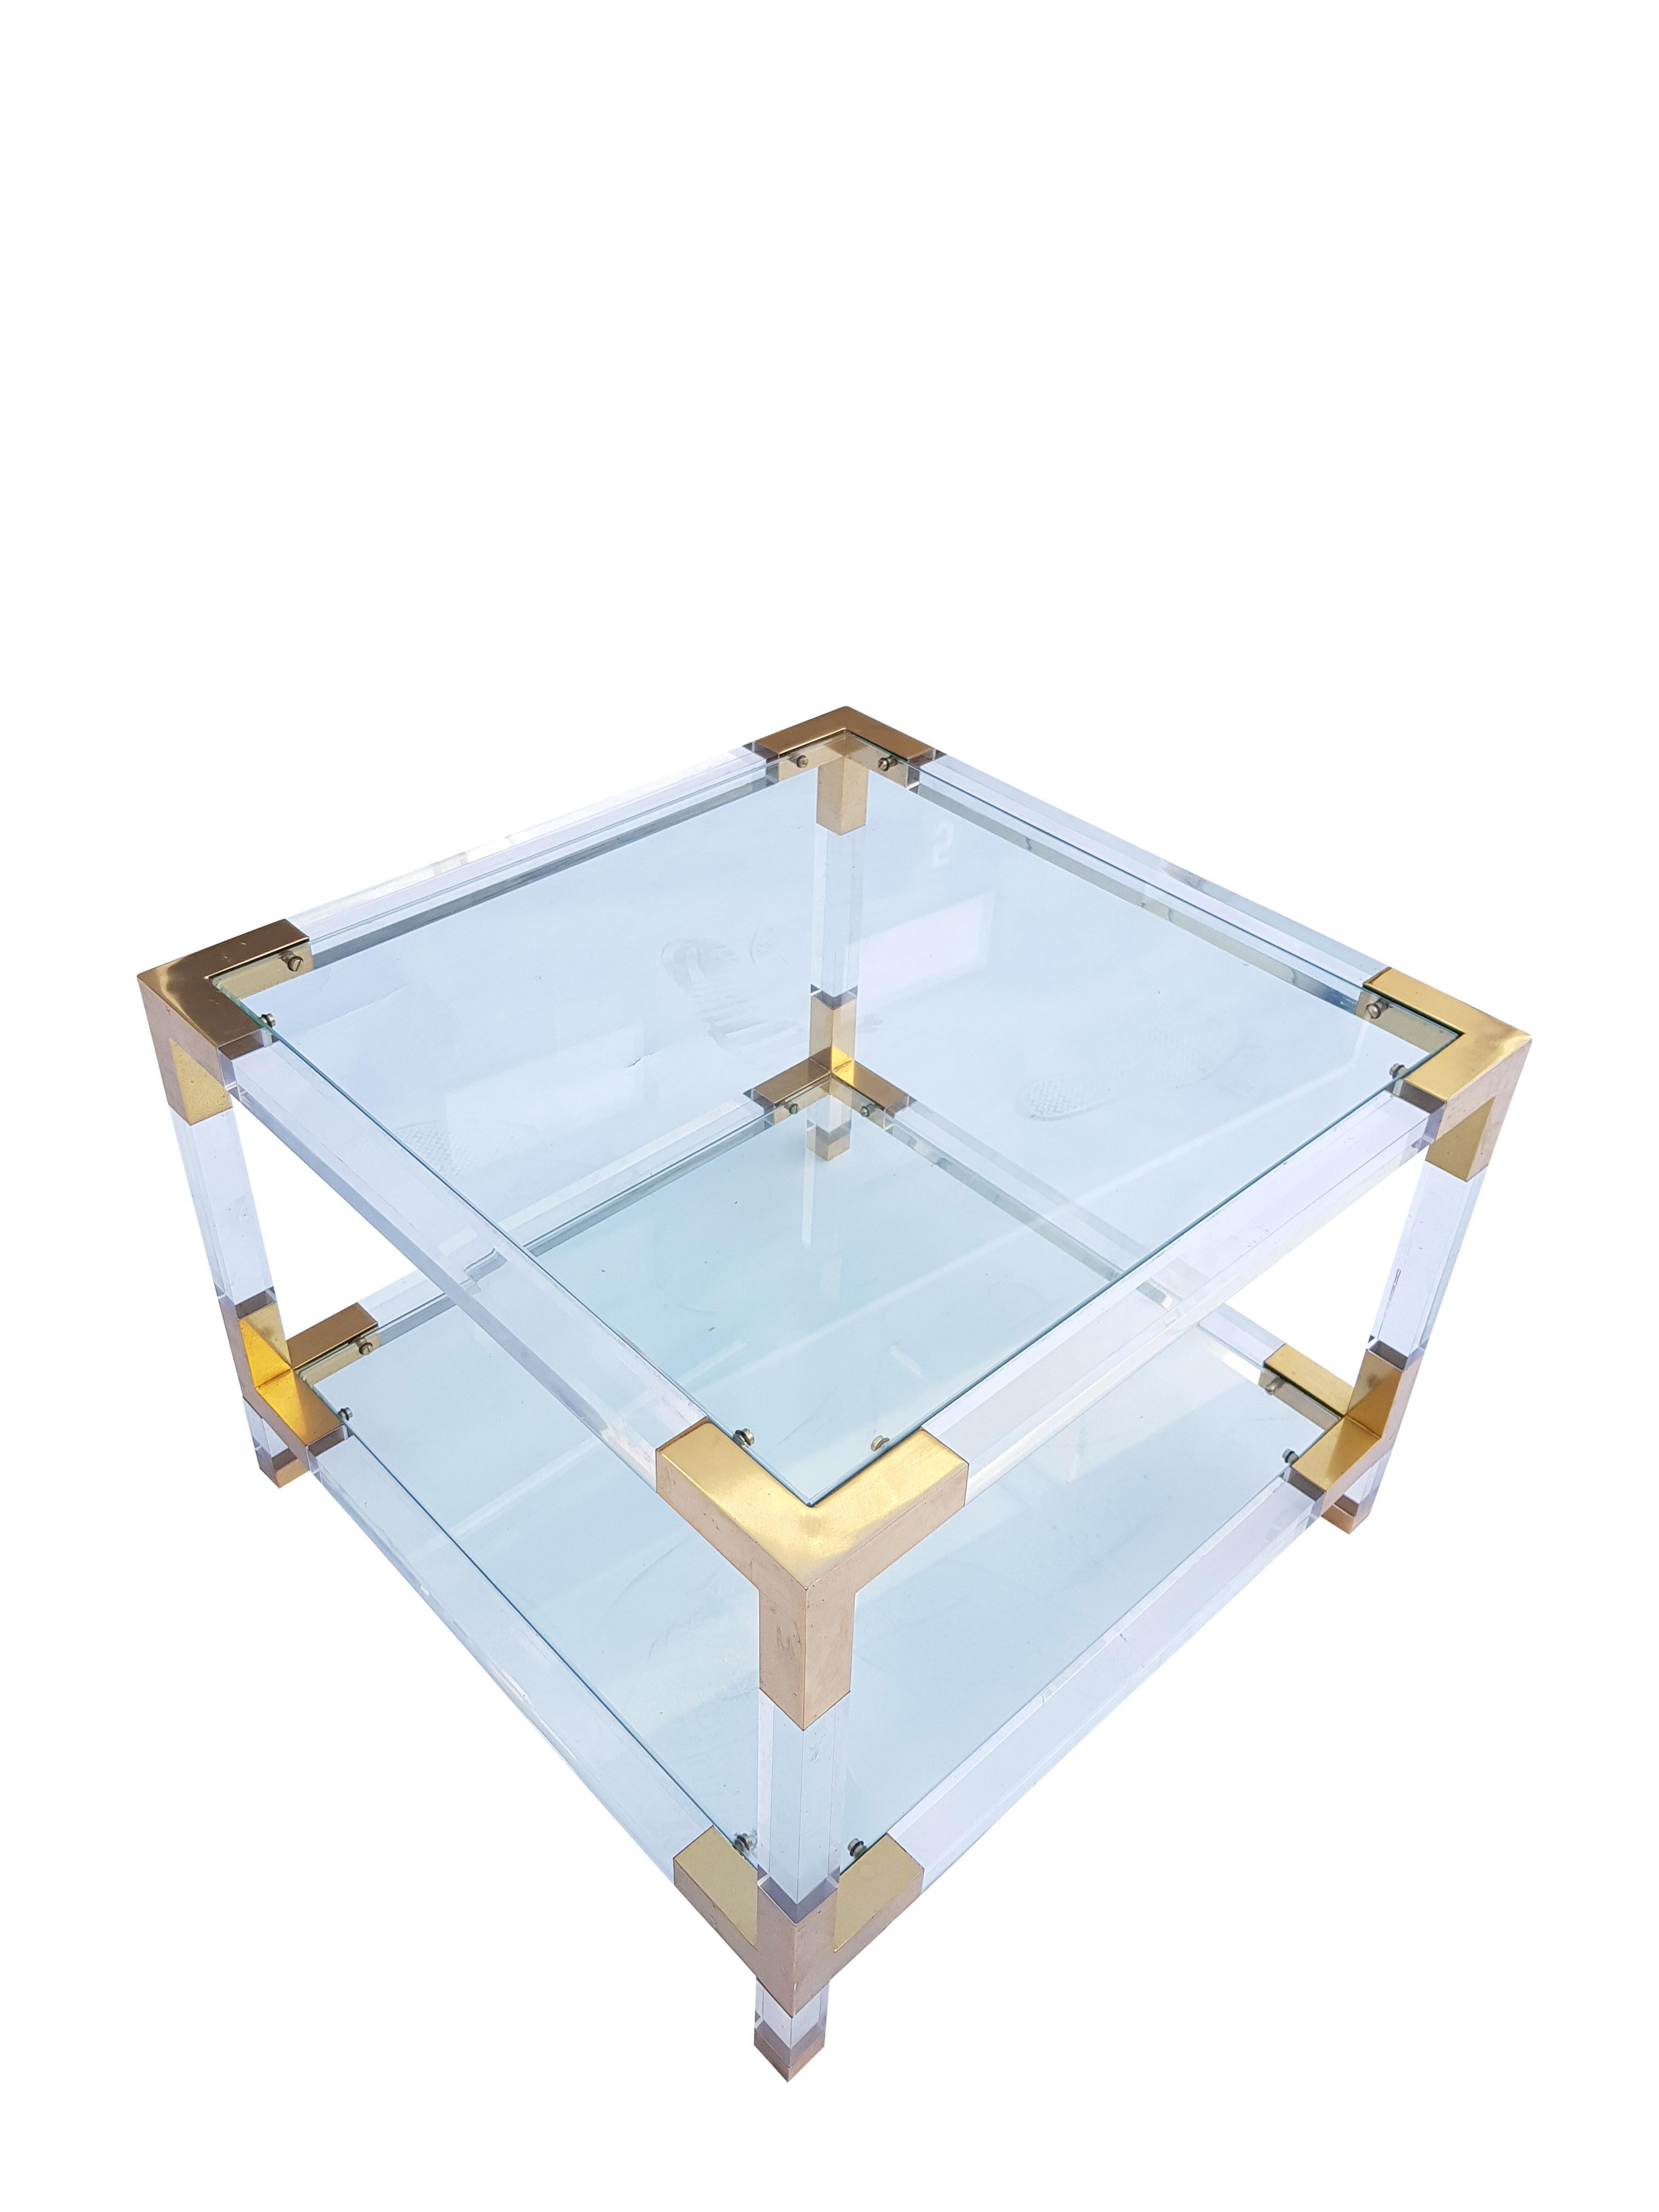 Hollywood Regency Pair of Lucite Square Two-Tier Side Tables with Brass Details For Sale